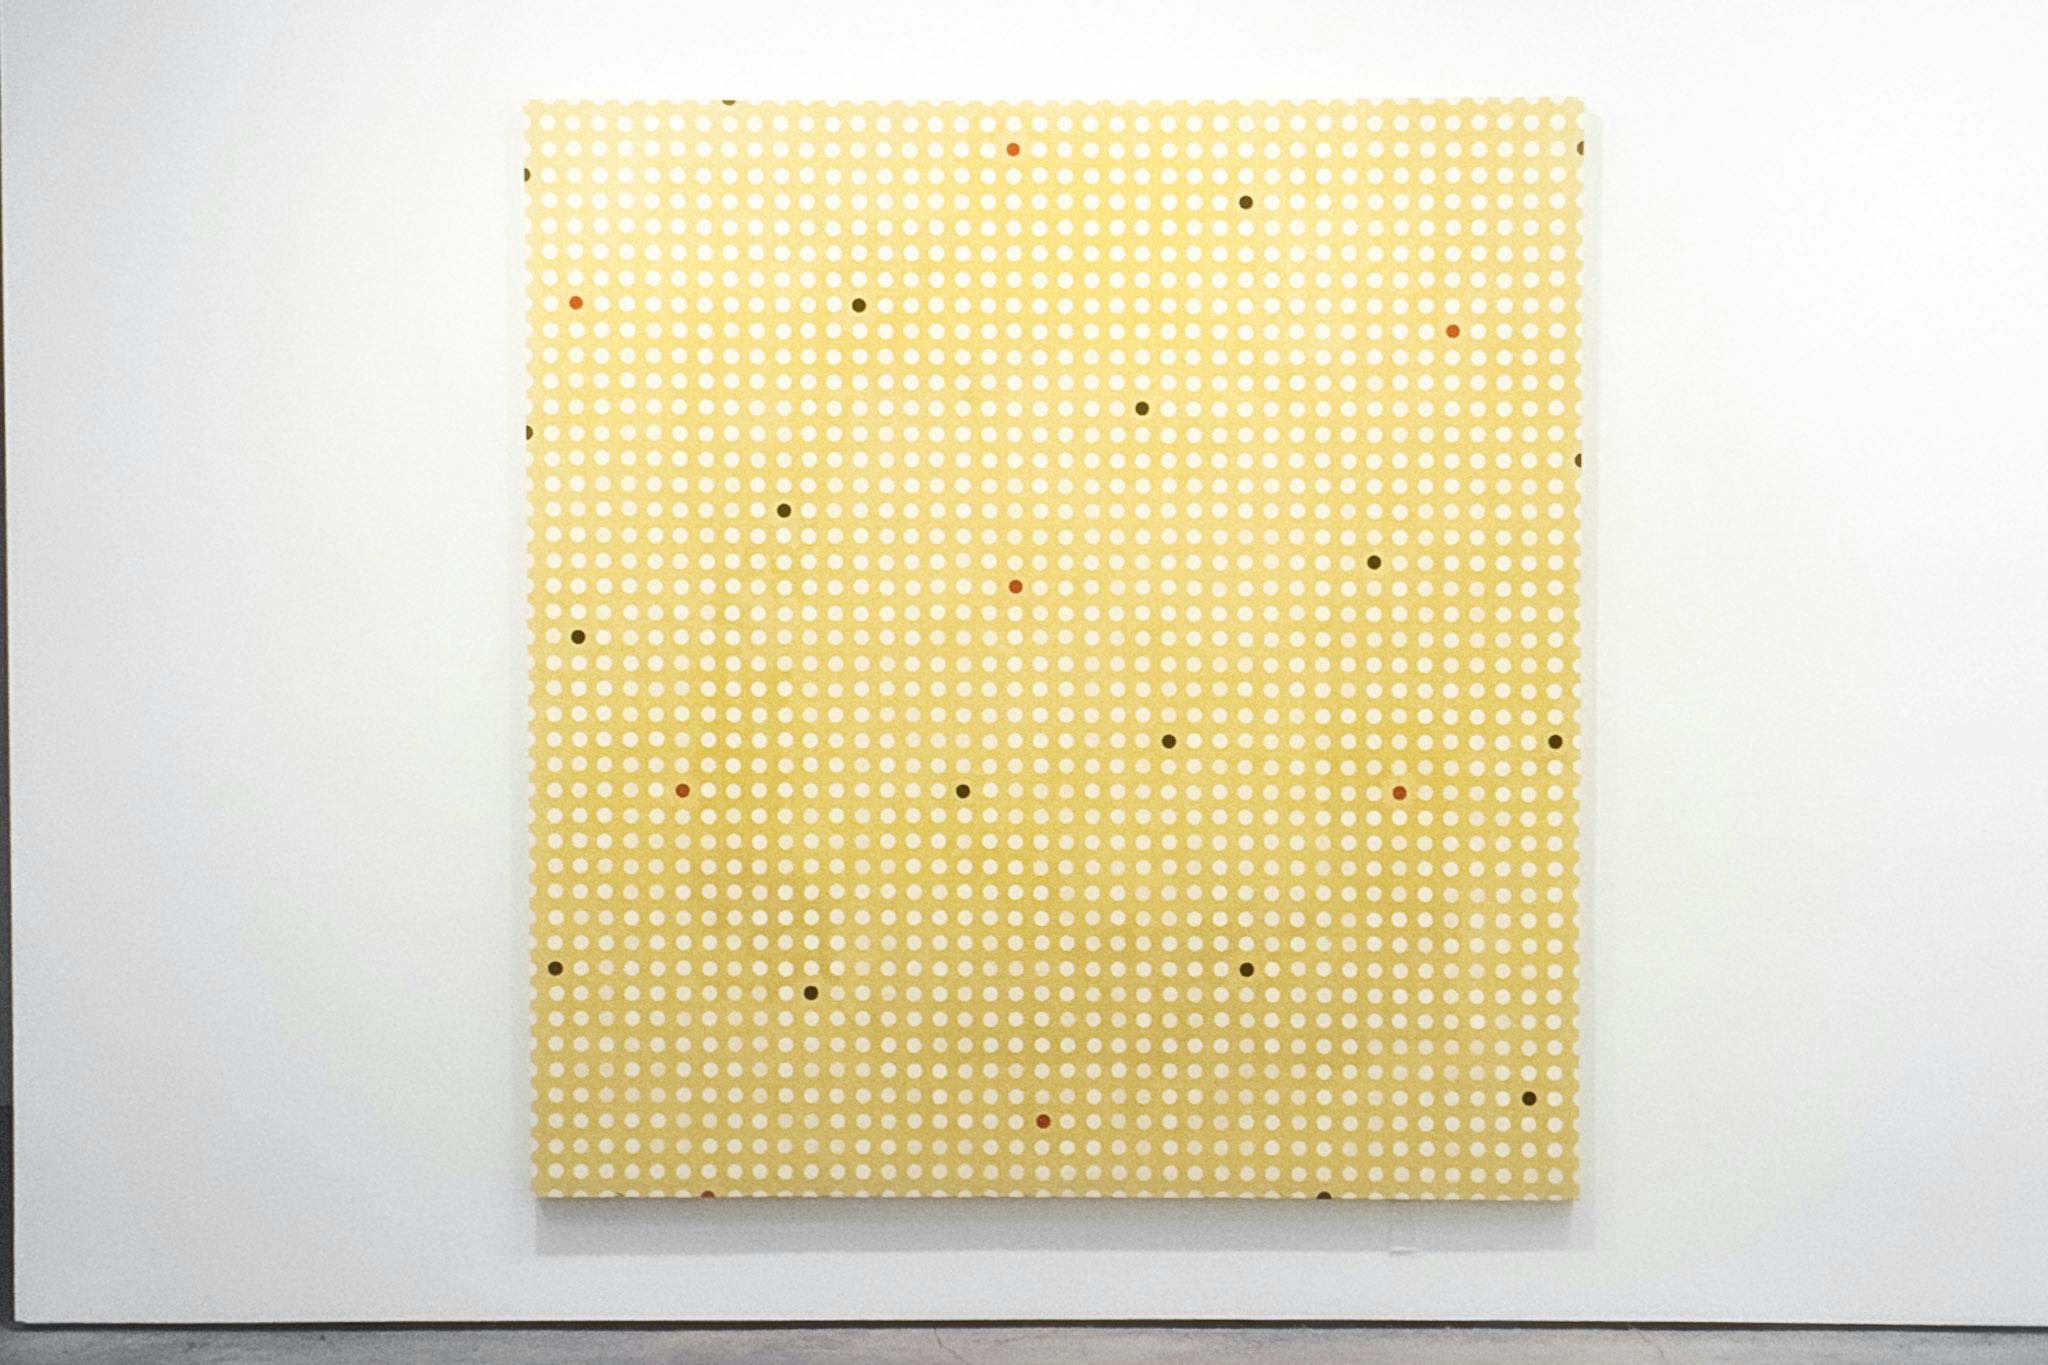 A large painting mounted on a white wall. The painting has a yellow background and a gridded dot pattern. Most of the dots are white, but some red and black dots are spread throughout.